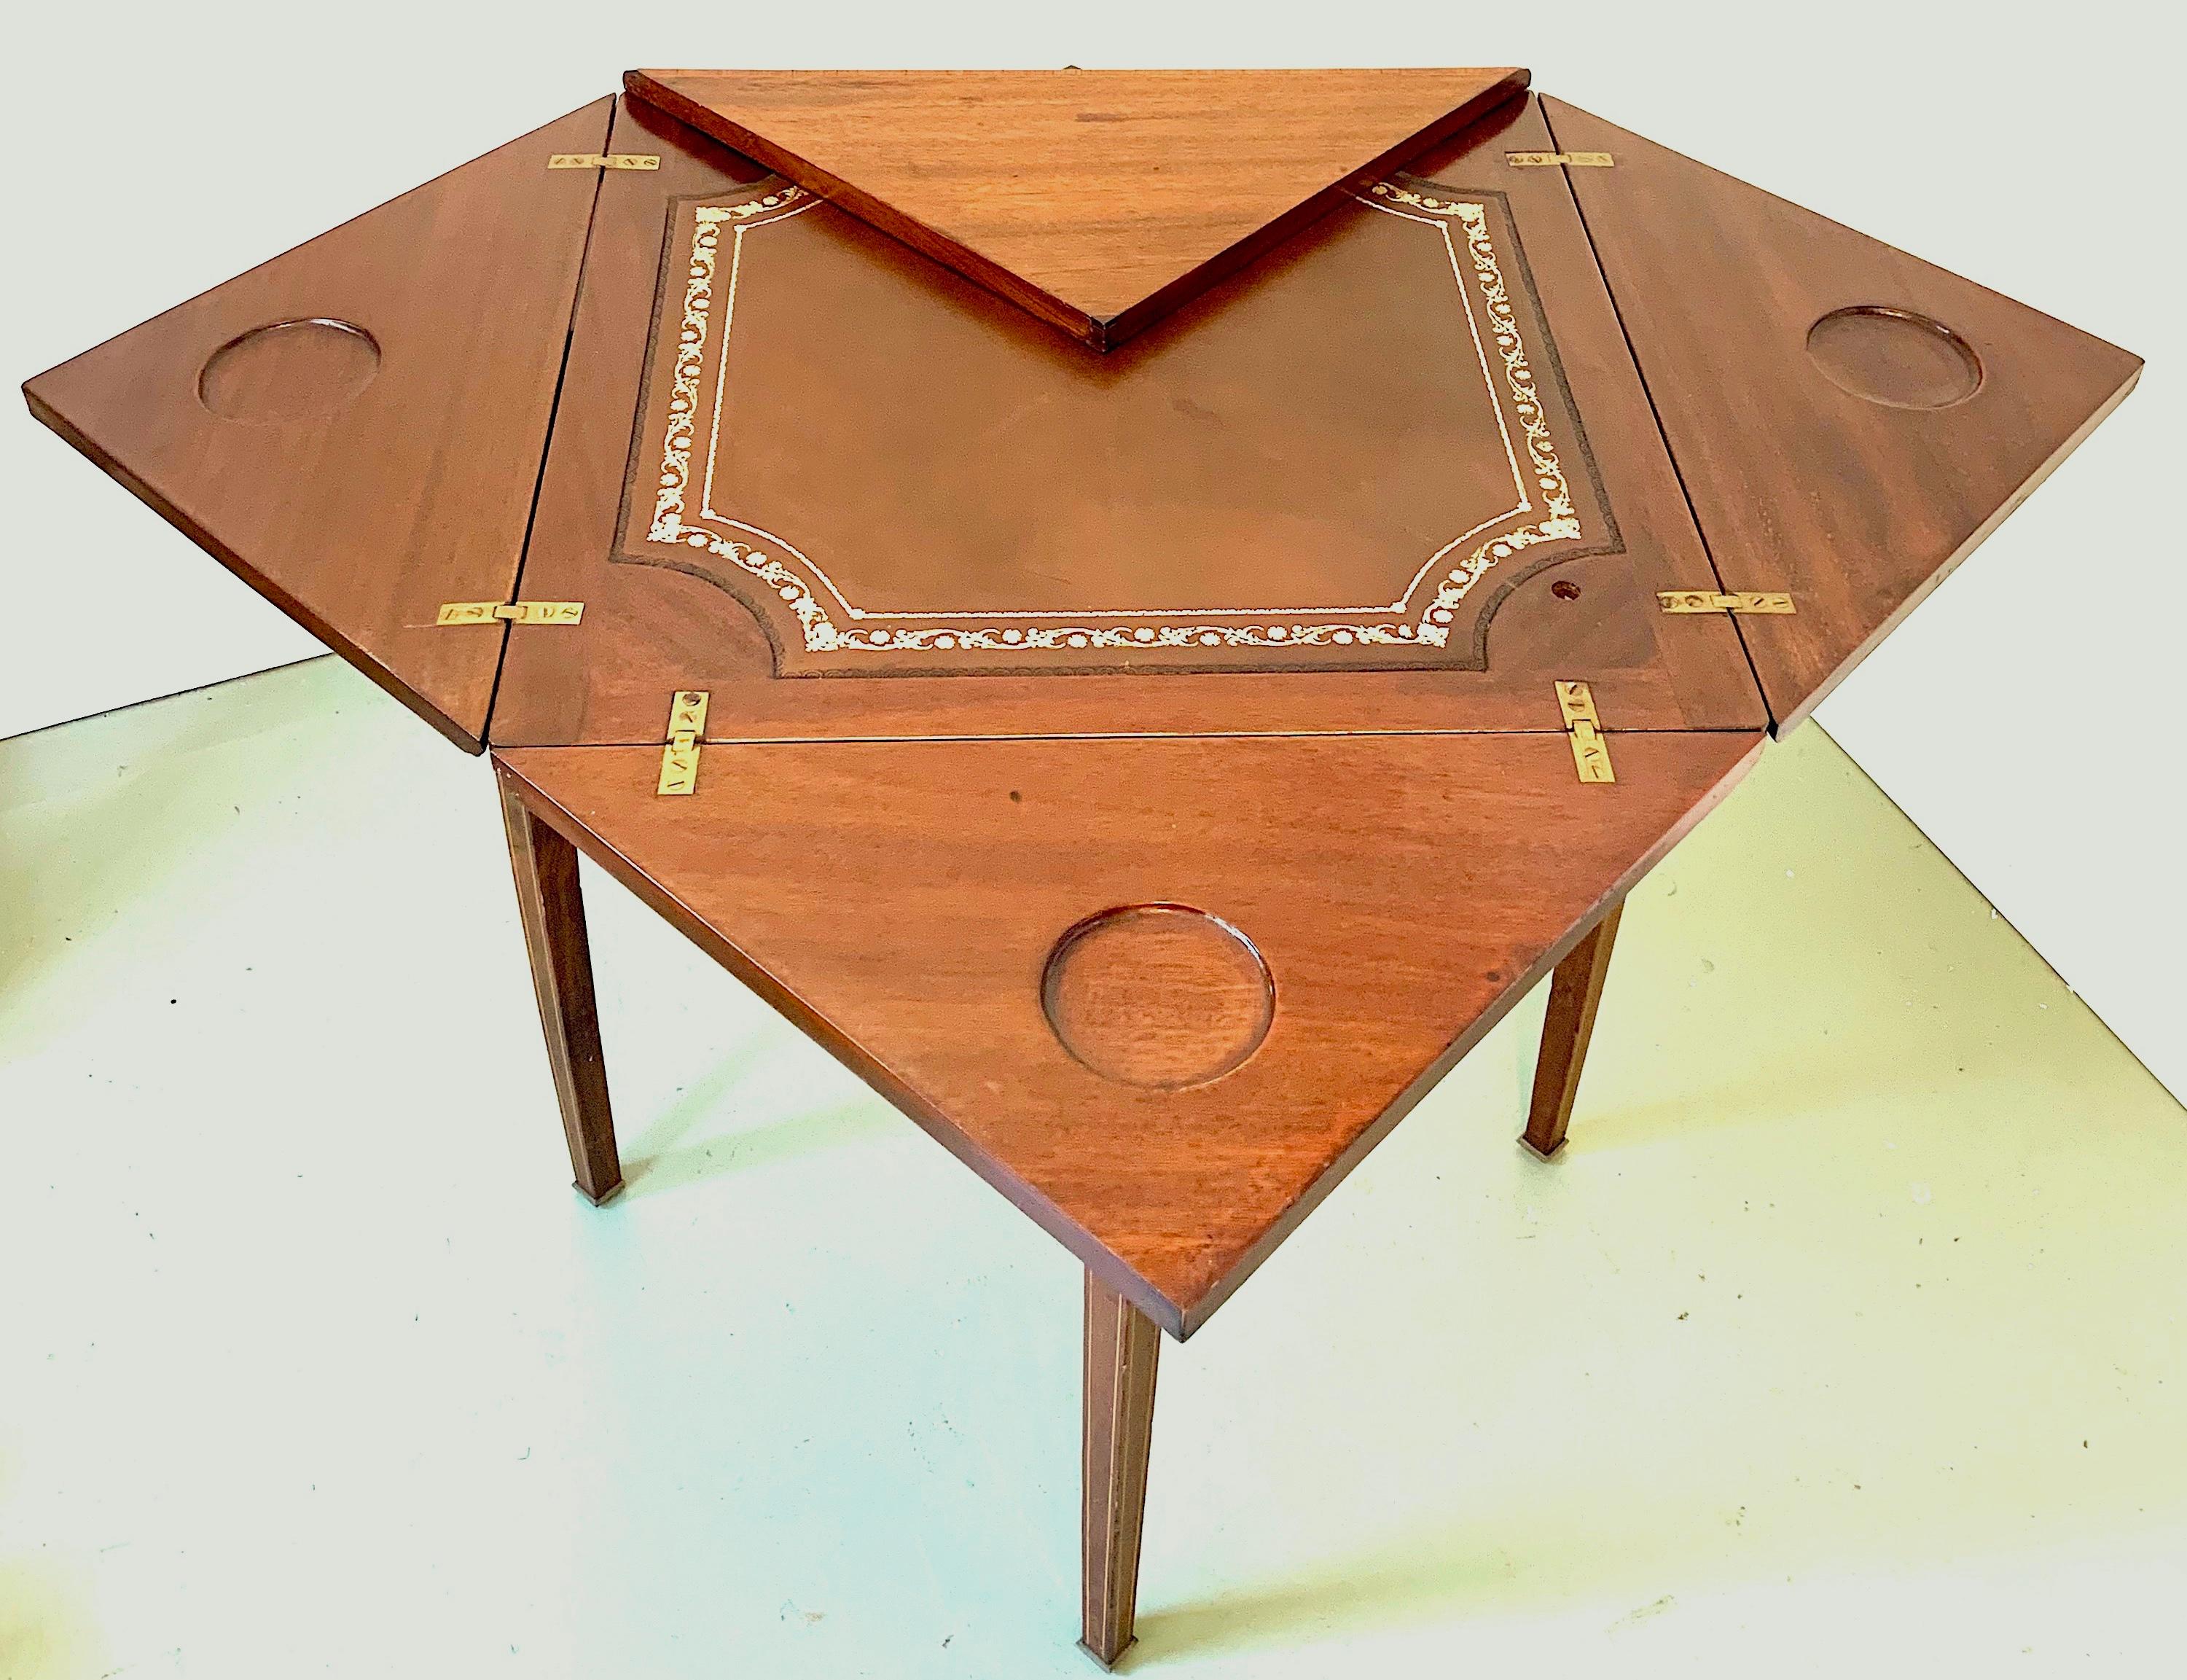 19th century wooden table with a beautiful envelope top. A turning action reveals the envelope diamond top to expose a leather game board insert with surrounding four insert compartments. This wonderful piece is ready for enjoyment.
Open top